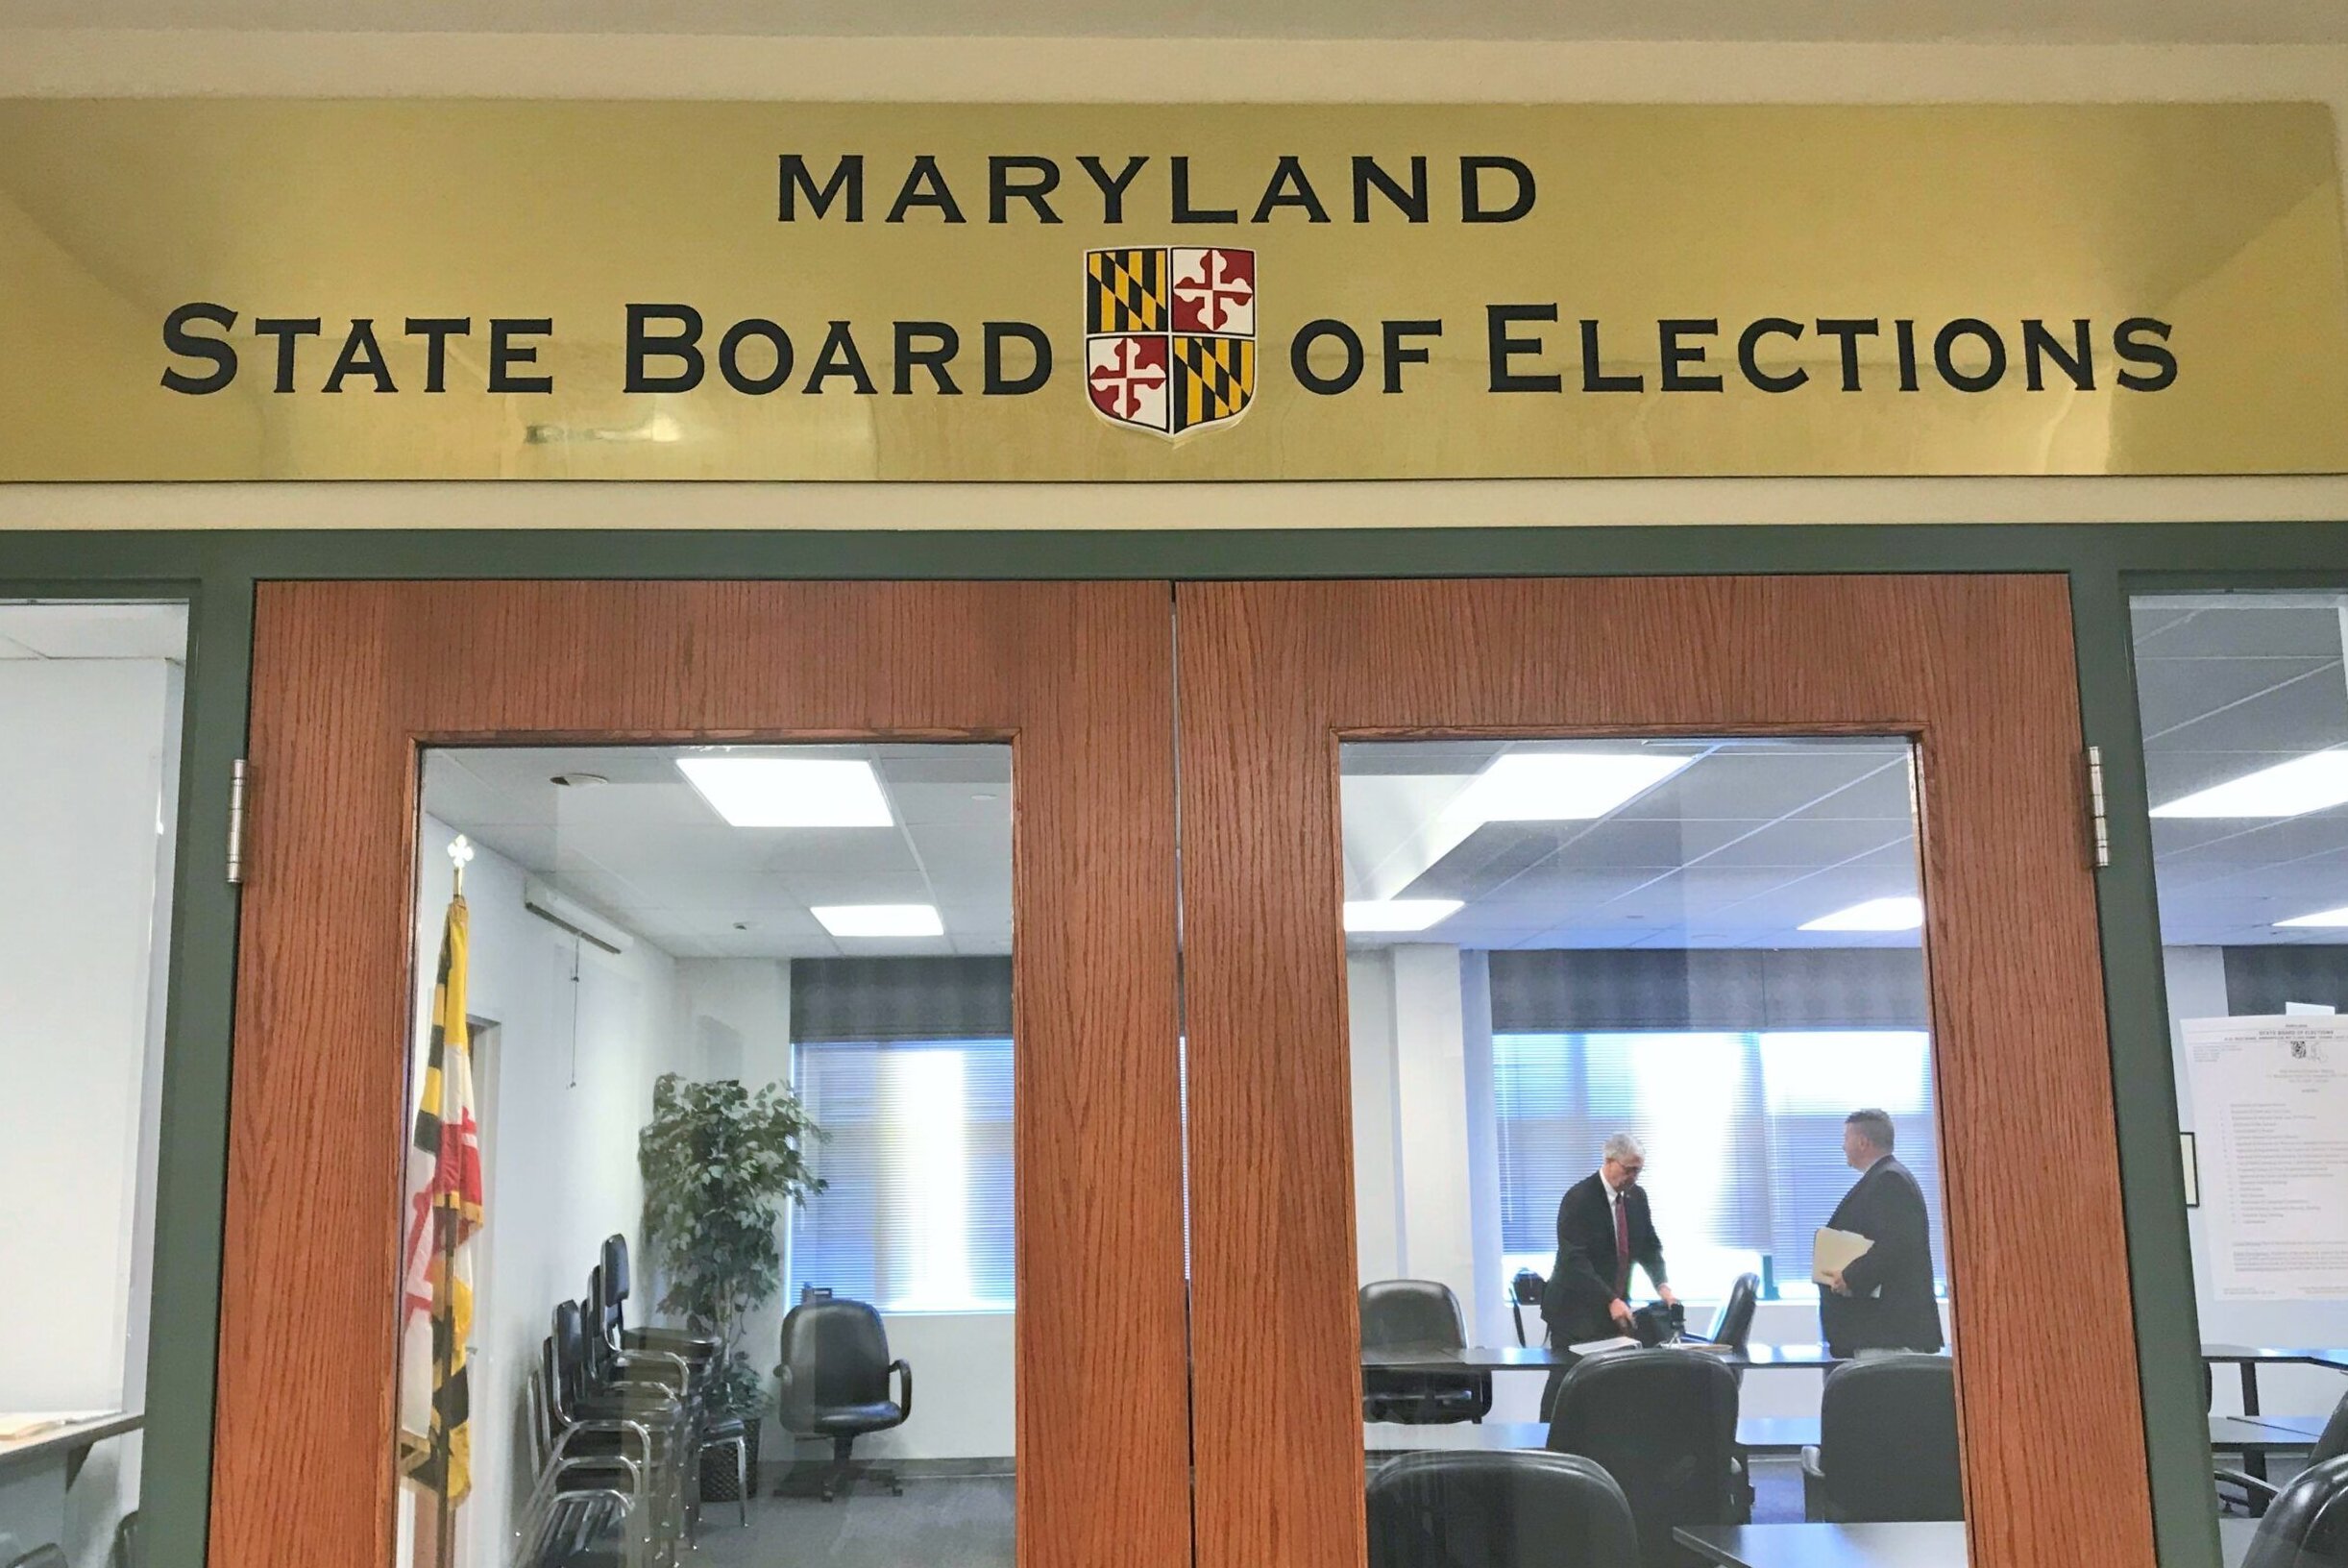 With a Democrat in the governor’s office, local election boards are changing membership